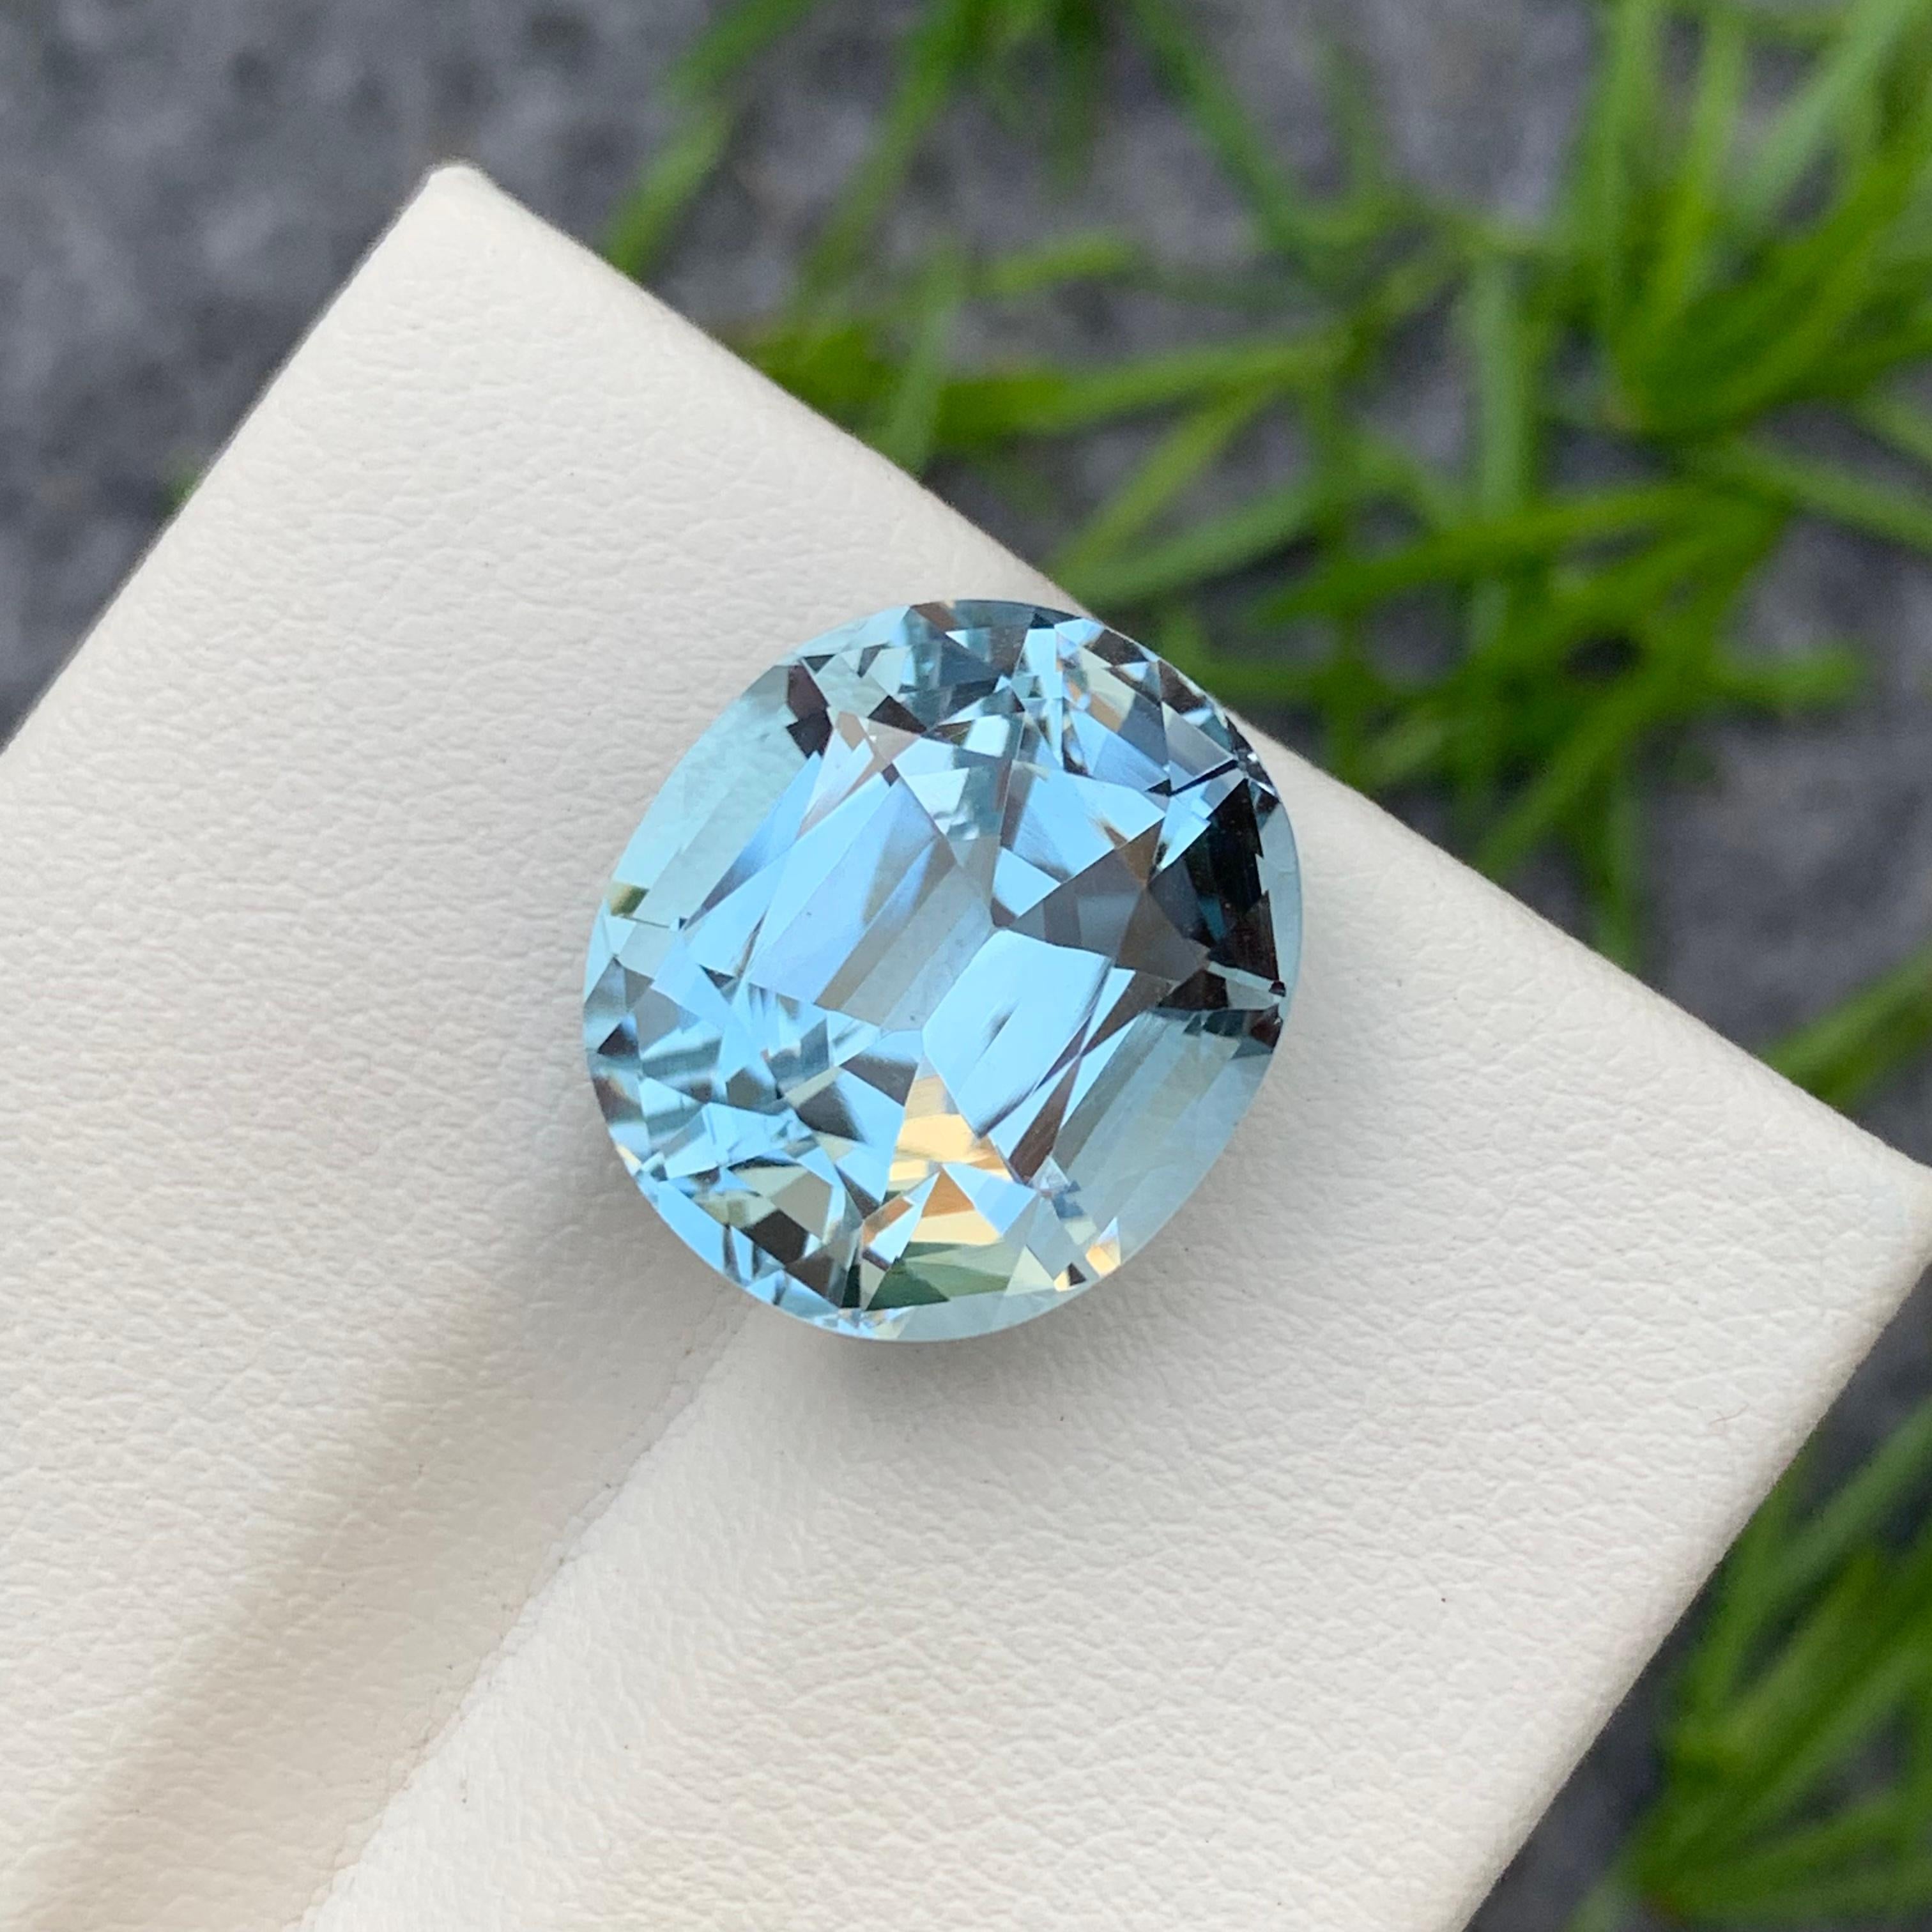 18.75 Carat Faceted Light Blue Topaz Cushion Cut Gemstone from Brazil Mine For Sale 1